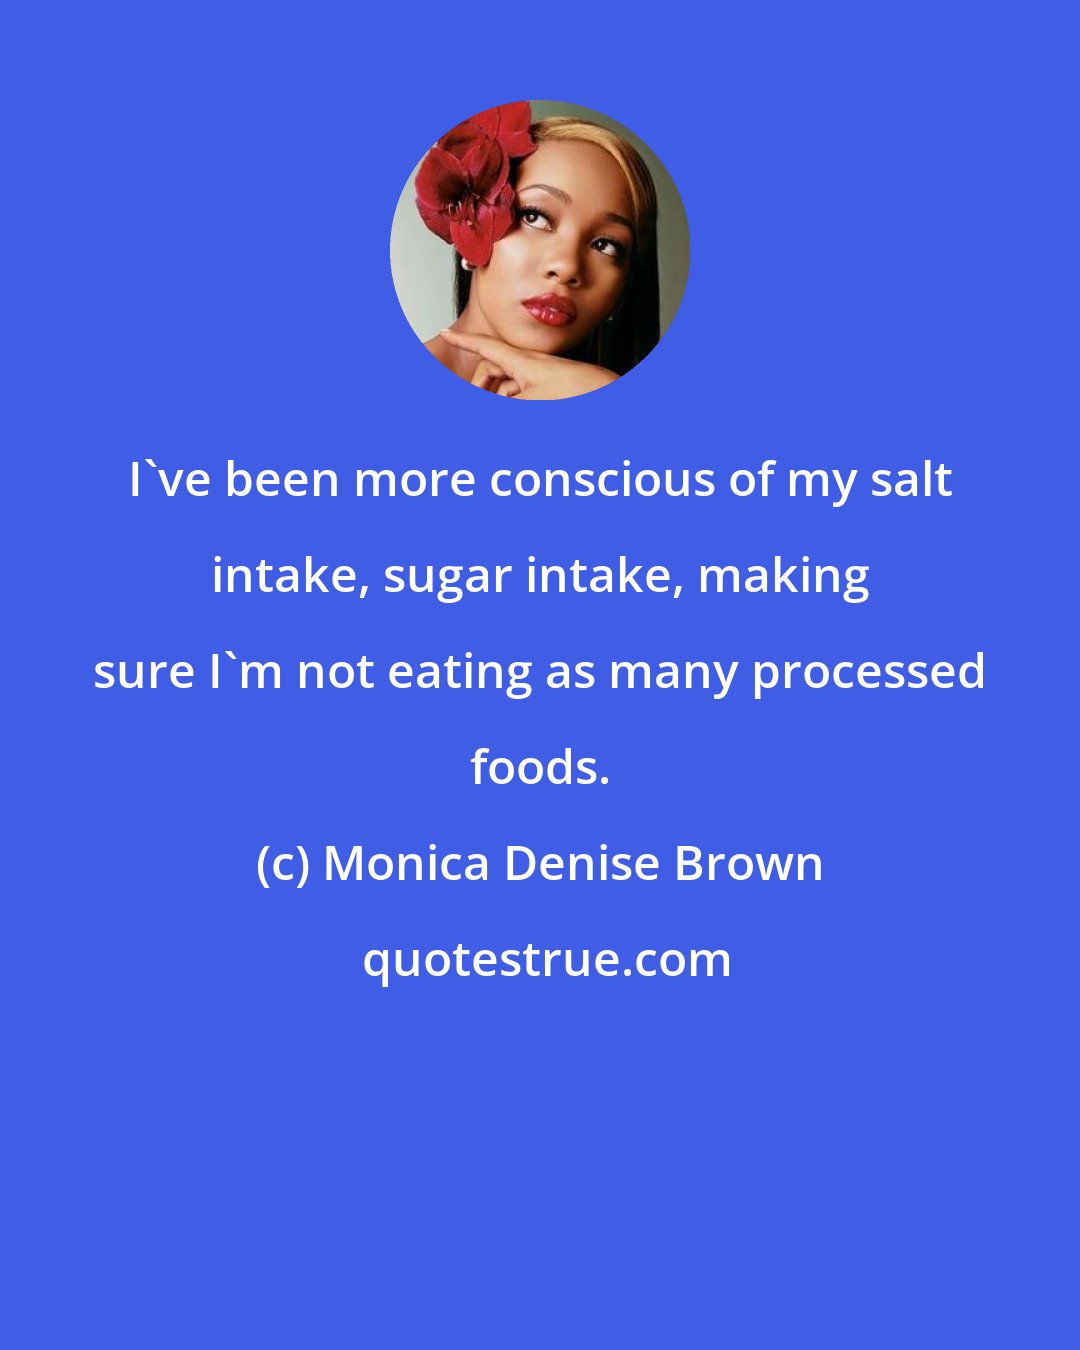 Monica Denise Brown: I've been more conscious of my salt intake, sugar intake, making sure I'm not eating as many processed foods.